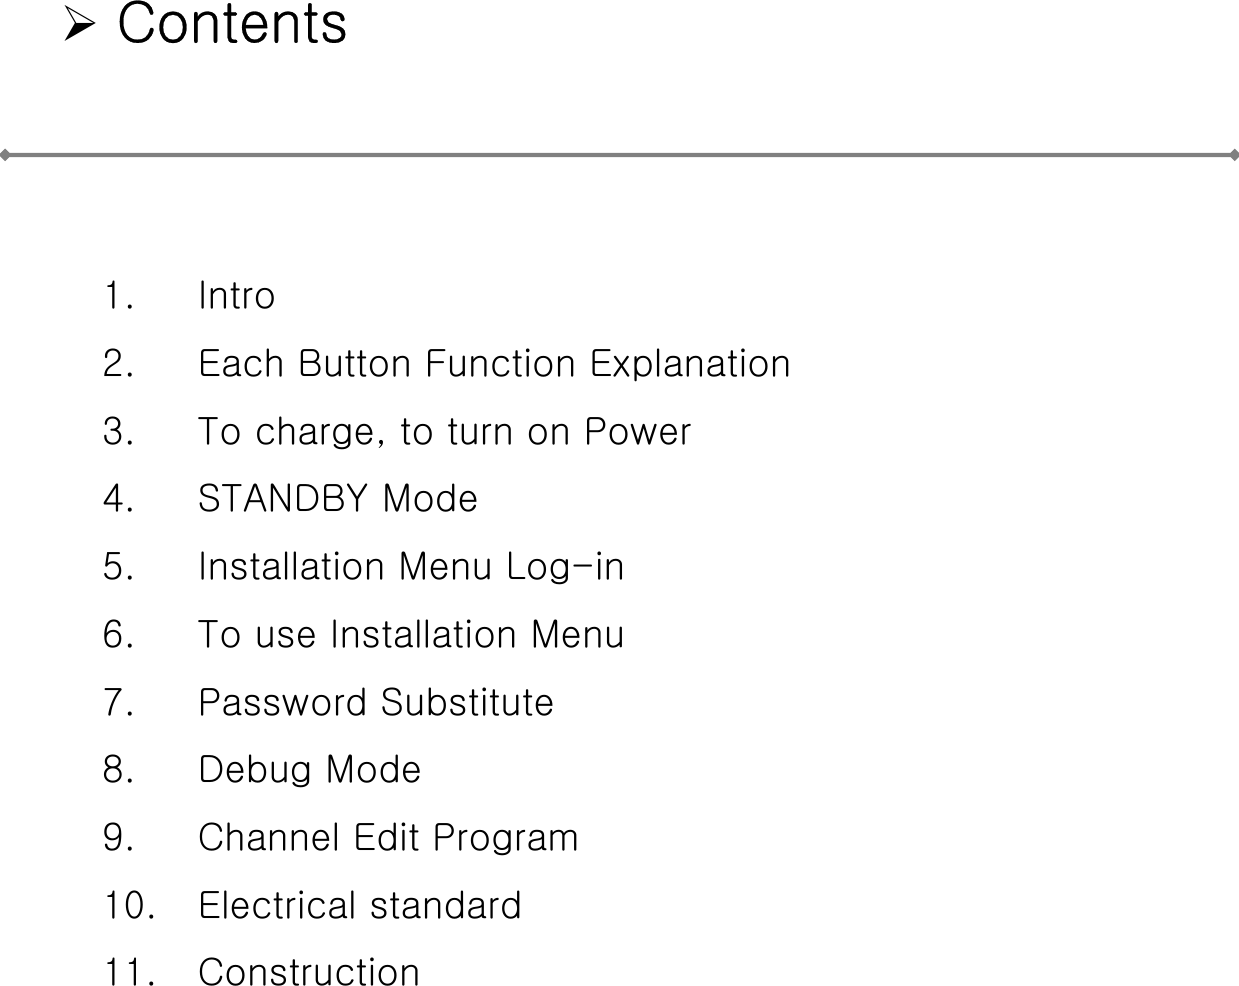 ¾Contents1. Intro2. Each Button Function Explanation3. To charge, to turn on Power4. STANDBY Mode5. Installation Menu Log-in6. To use Installation Menu7. Password Substitute8. Debug Mode9. Channel Edit Program10. Electrical standard11. Construction